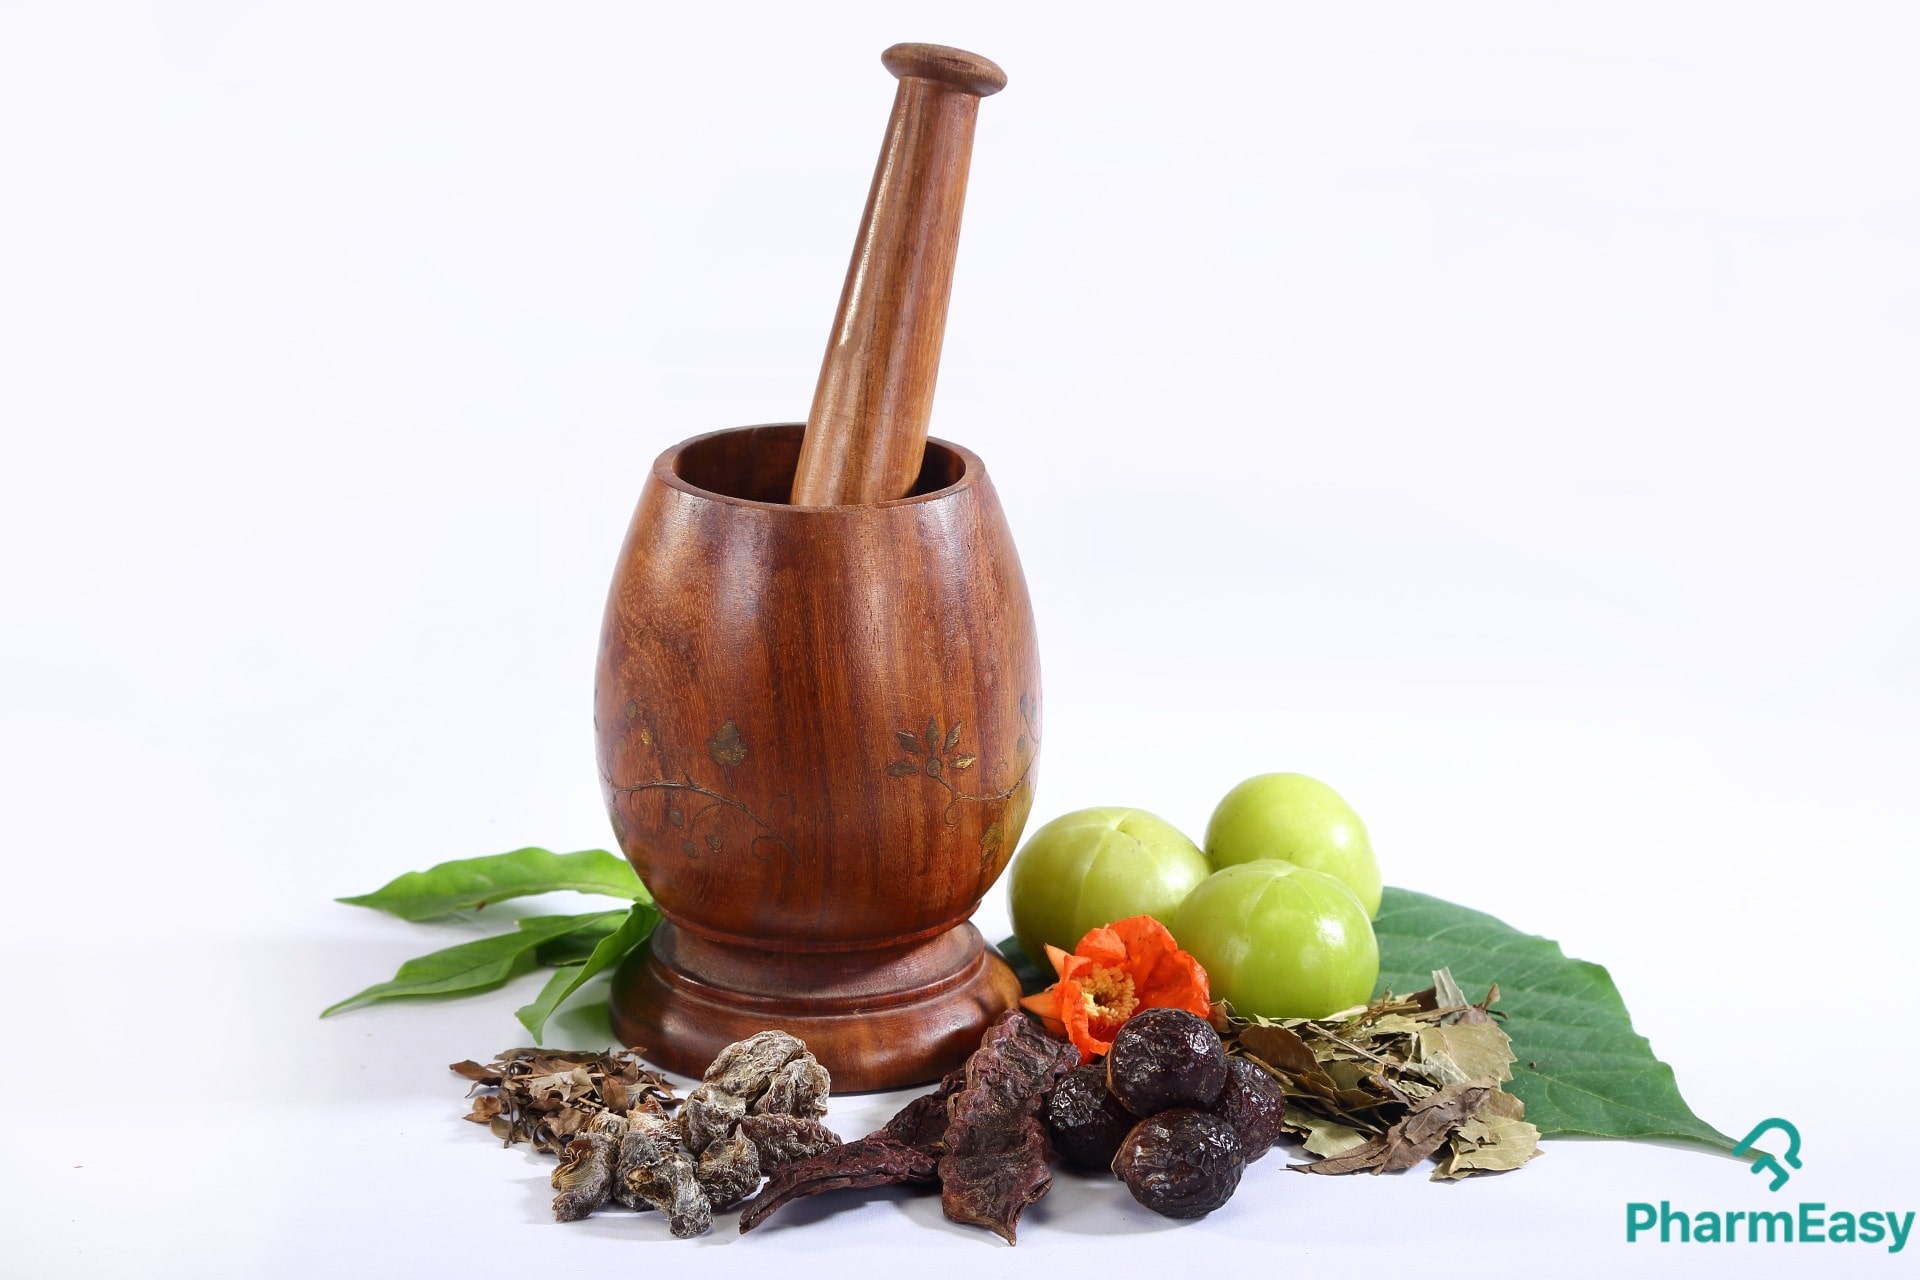 Popular Ayurvedic Herbs and Their Potential Benefits